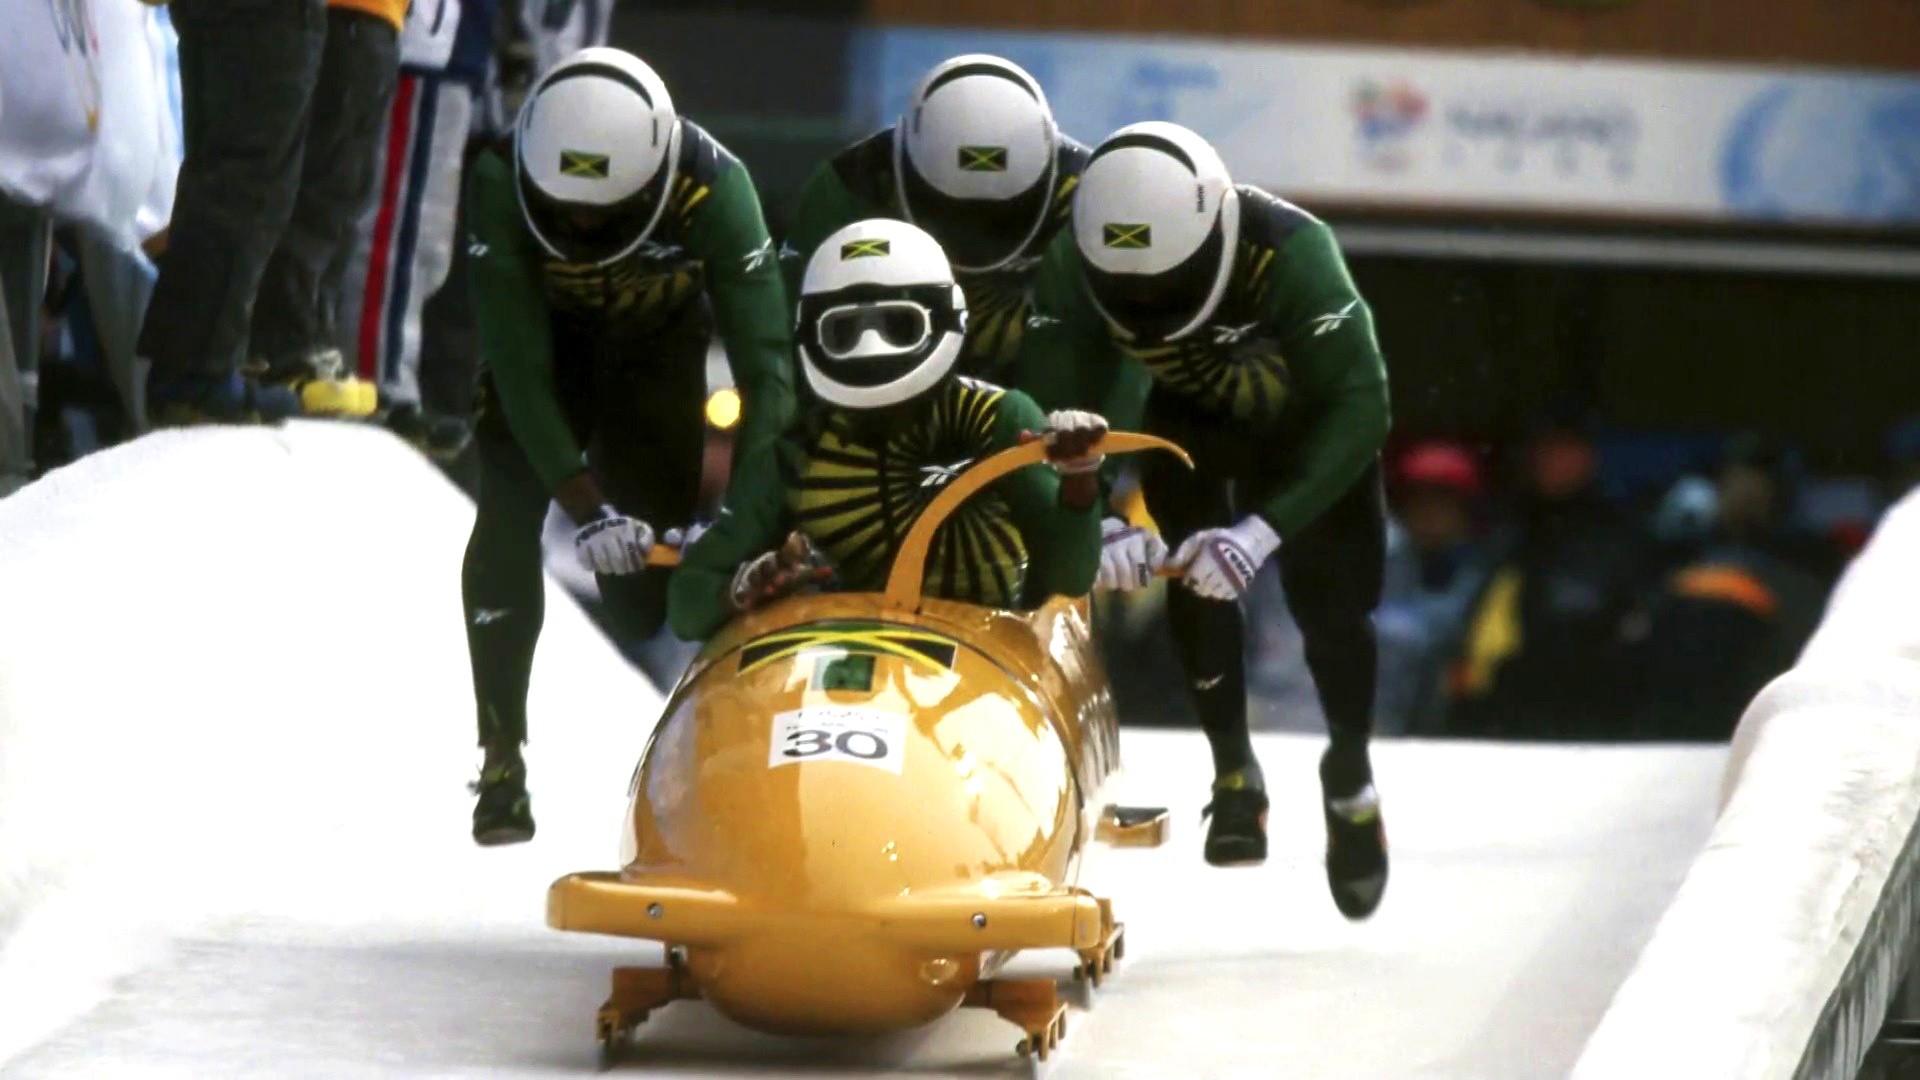 Jamaica to compete in 4-man bobsled at Olympics for 1st time in over 20 years